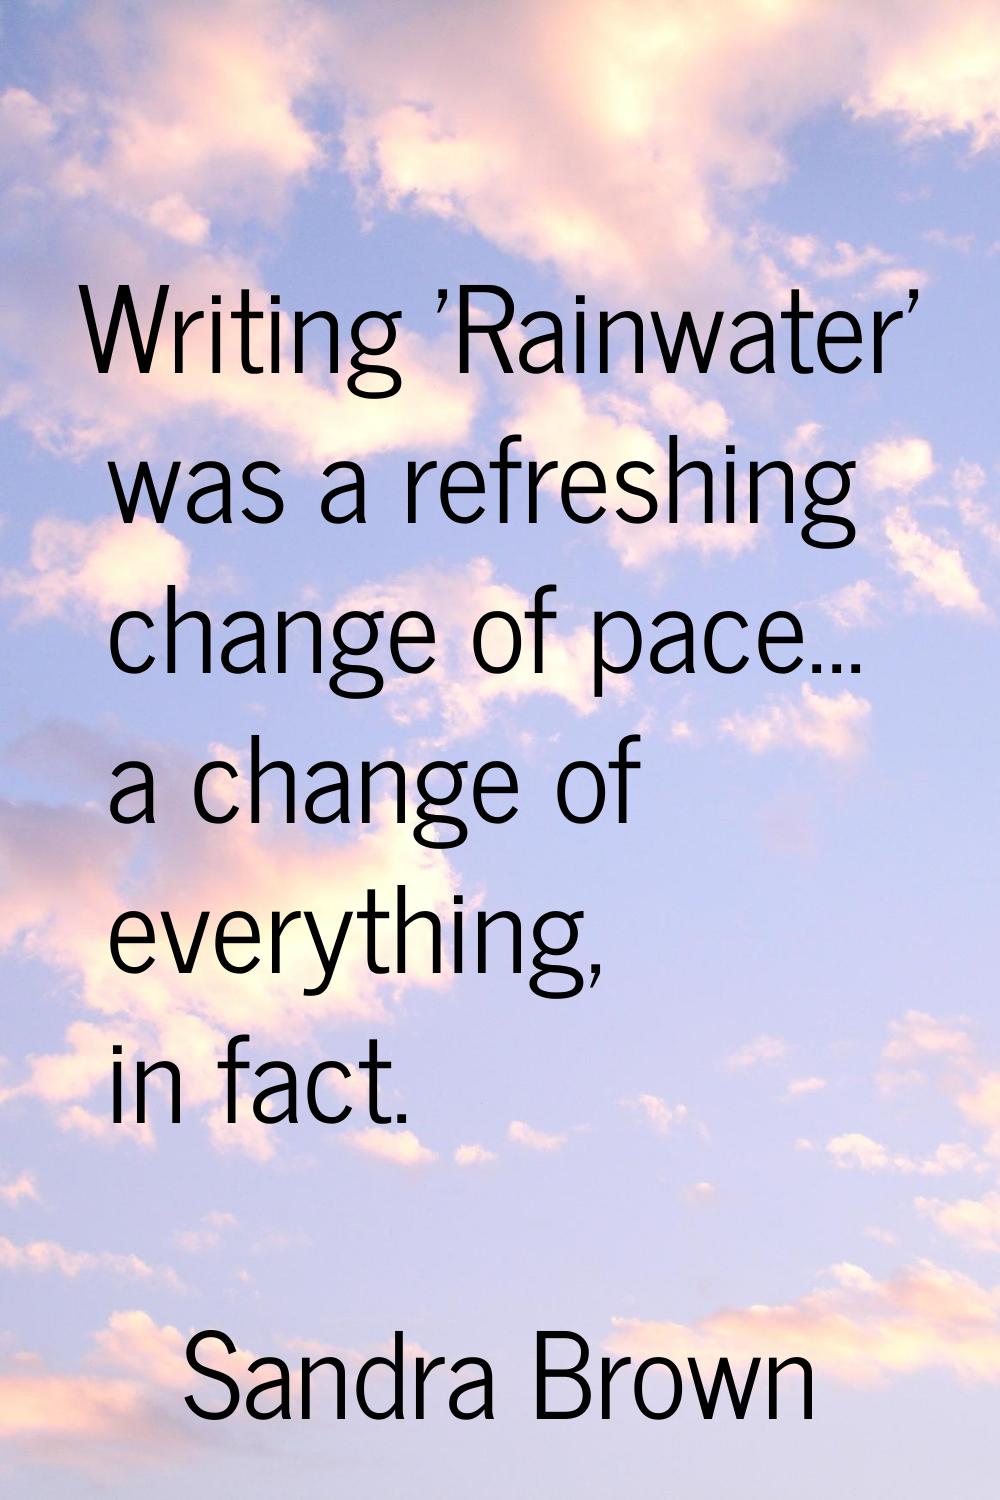 Writing 'Rainwater' was a refreshing change of pace... a change of everything, in fact.